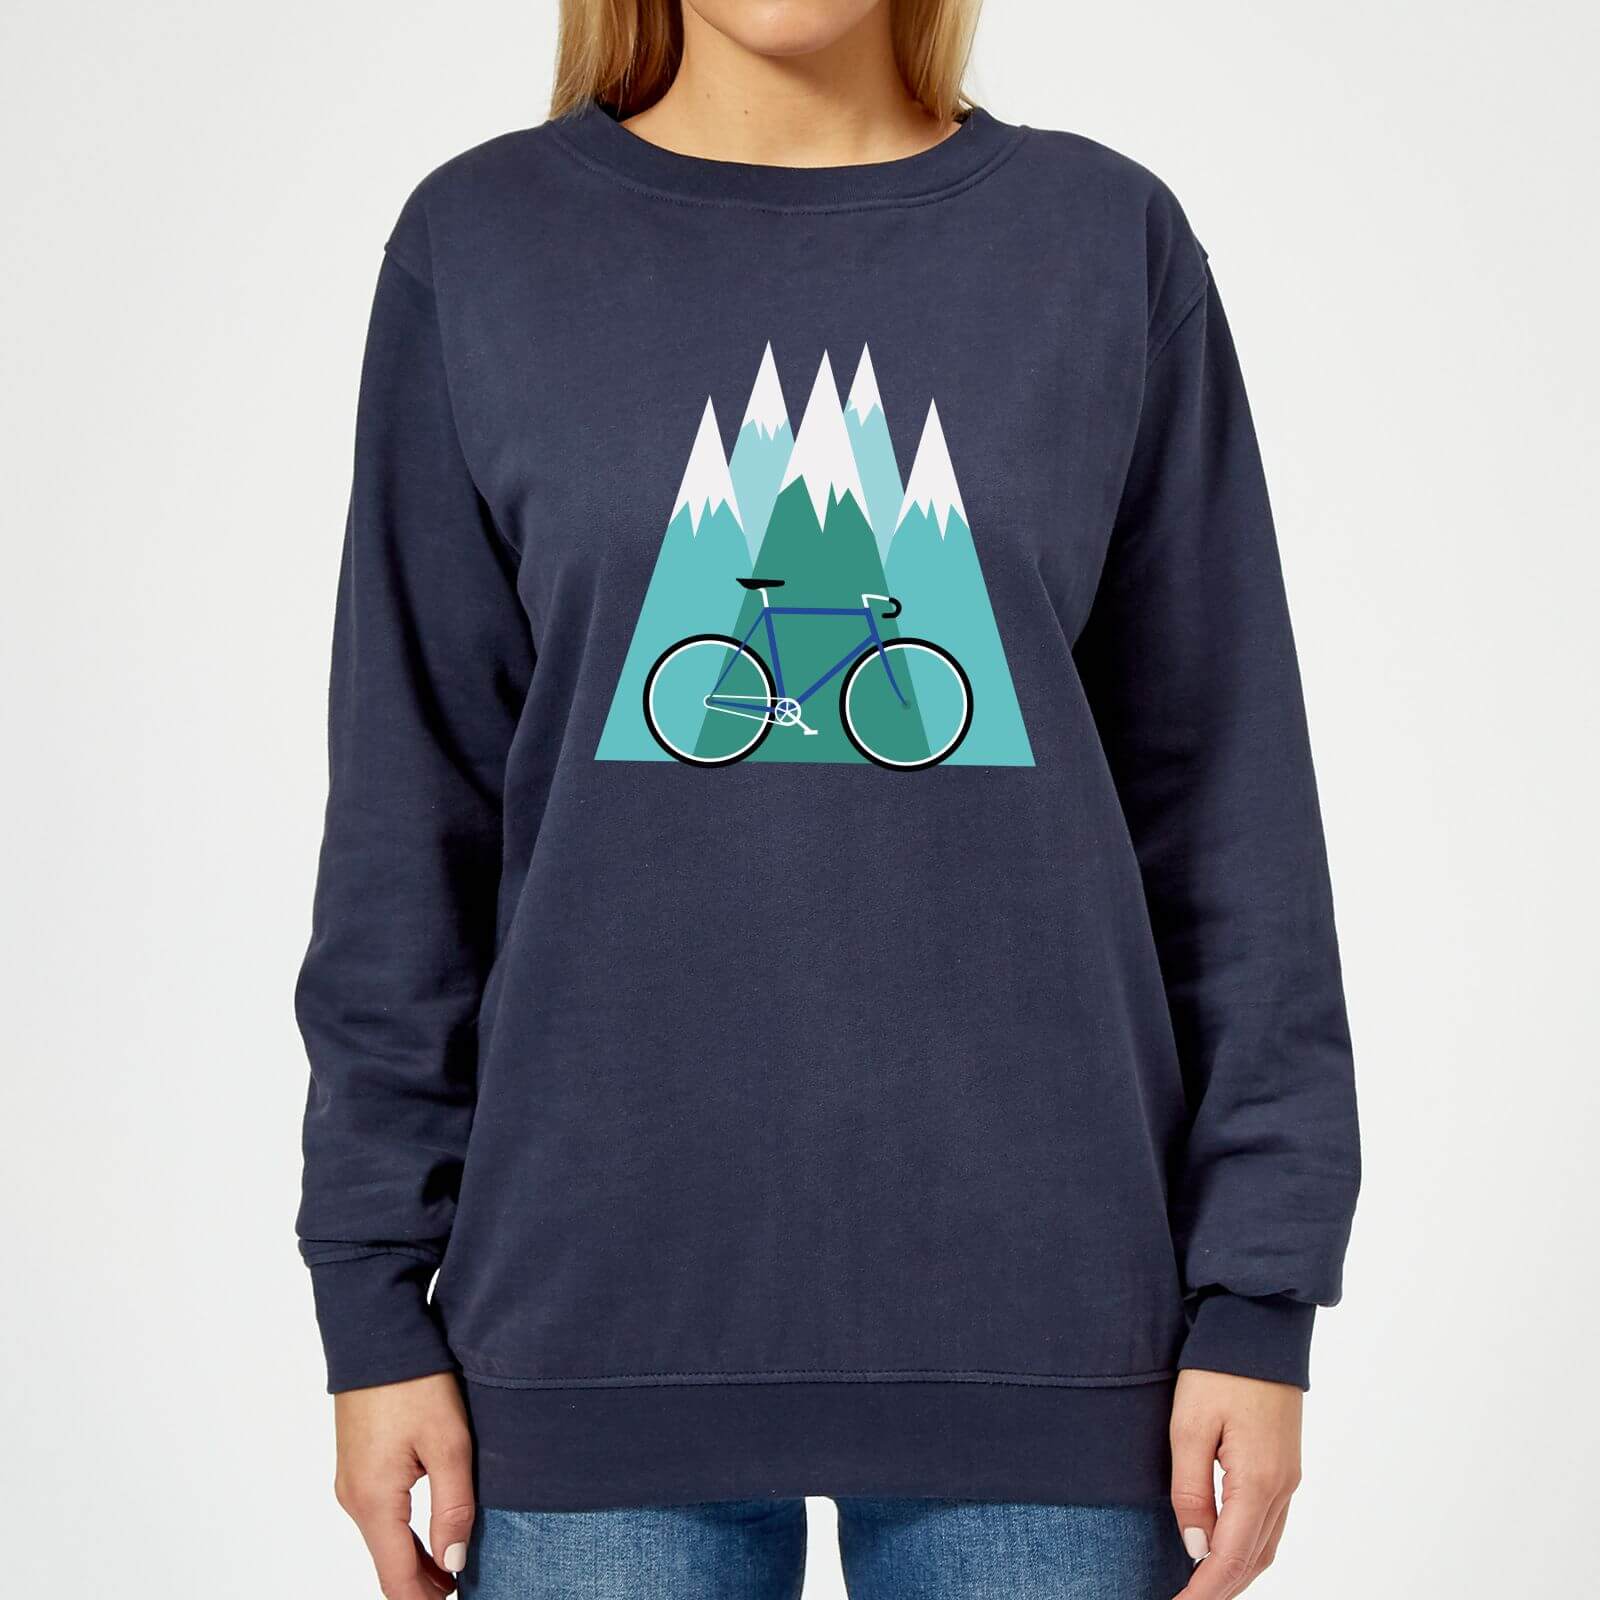 Bike and Mountains Women's Christmas Jumper - Navy - M - Navy